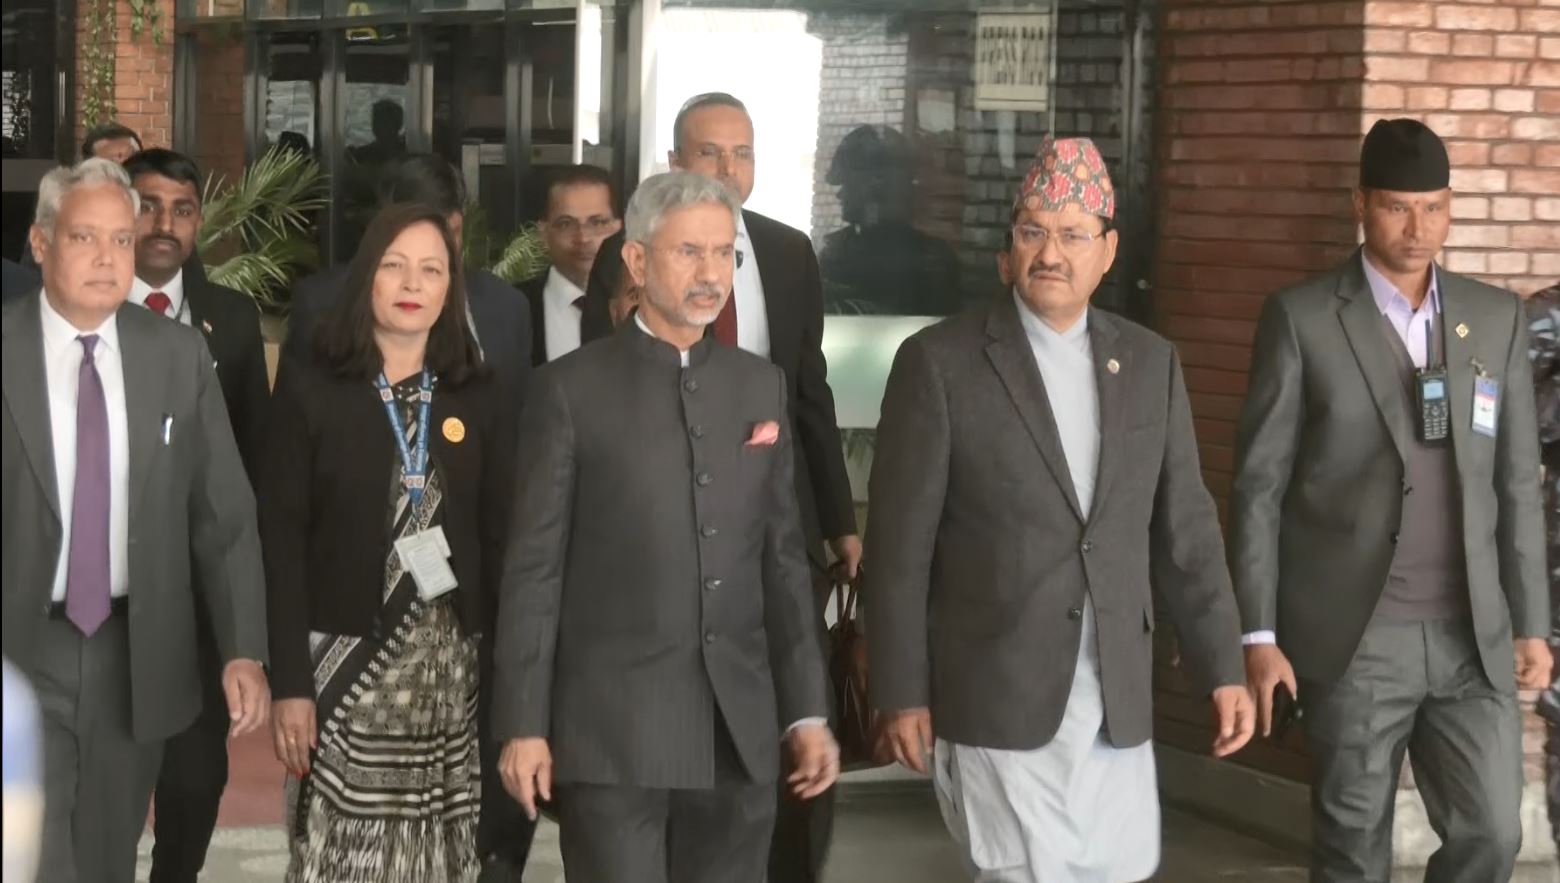 Indian Foreign Minister S. Jaishankar wraps up Nepal visit after high-level meetings